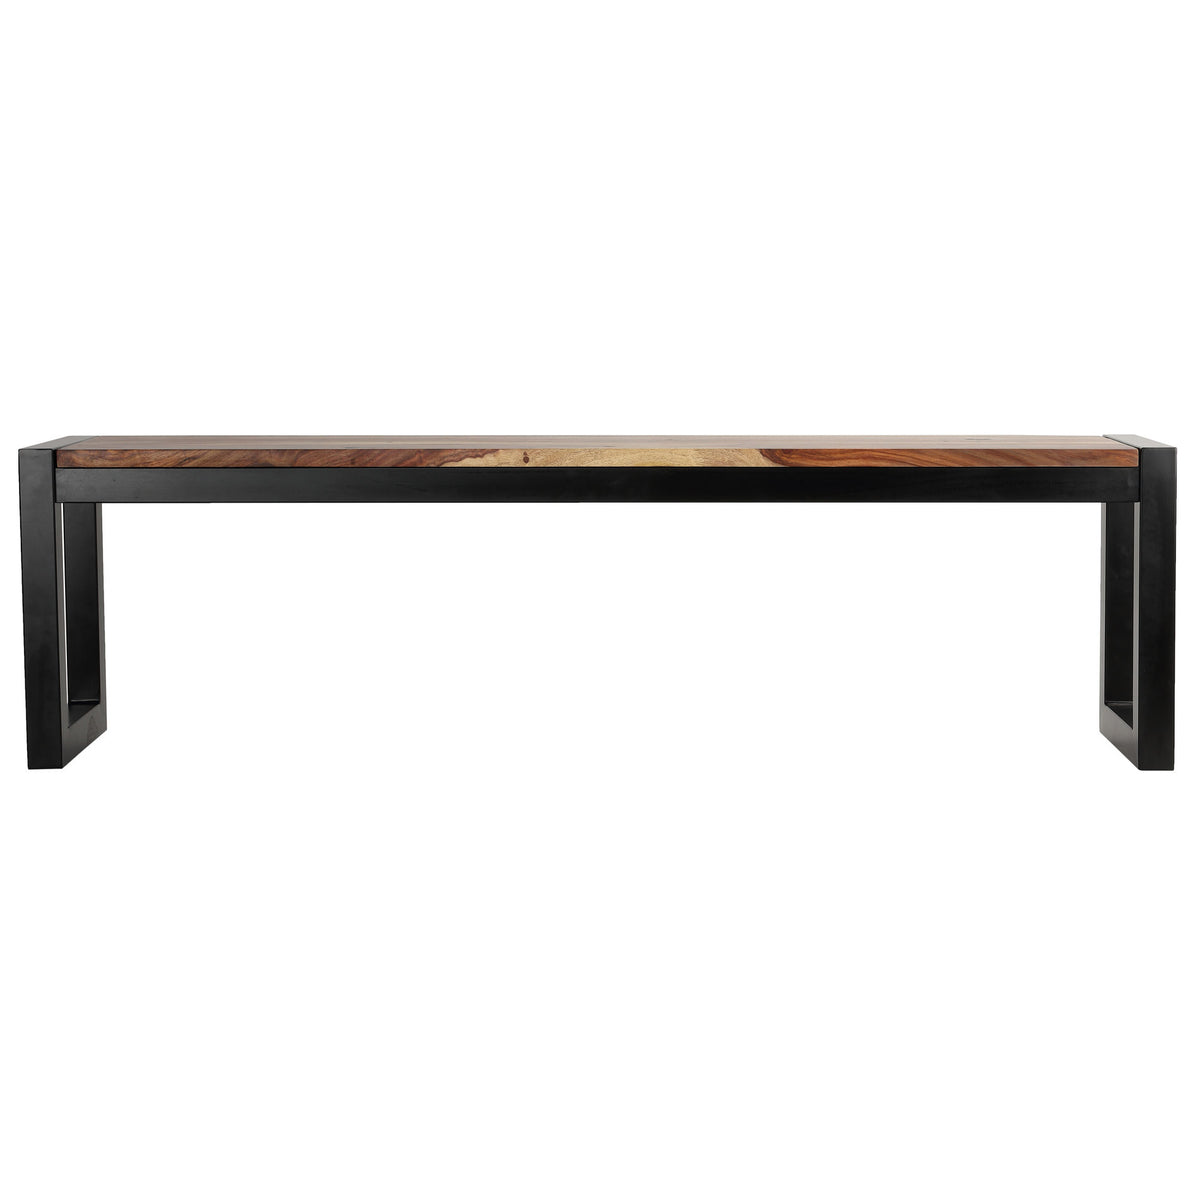 Bare Decor Delia Wood Dining Bench with Metal Base